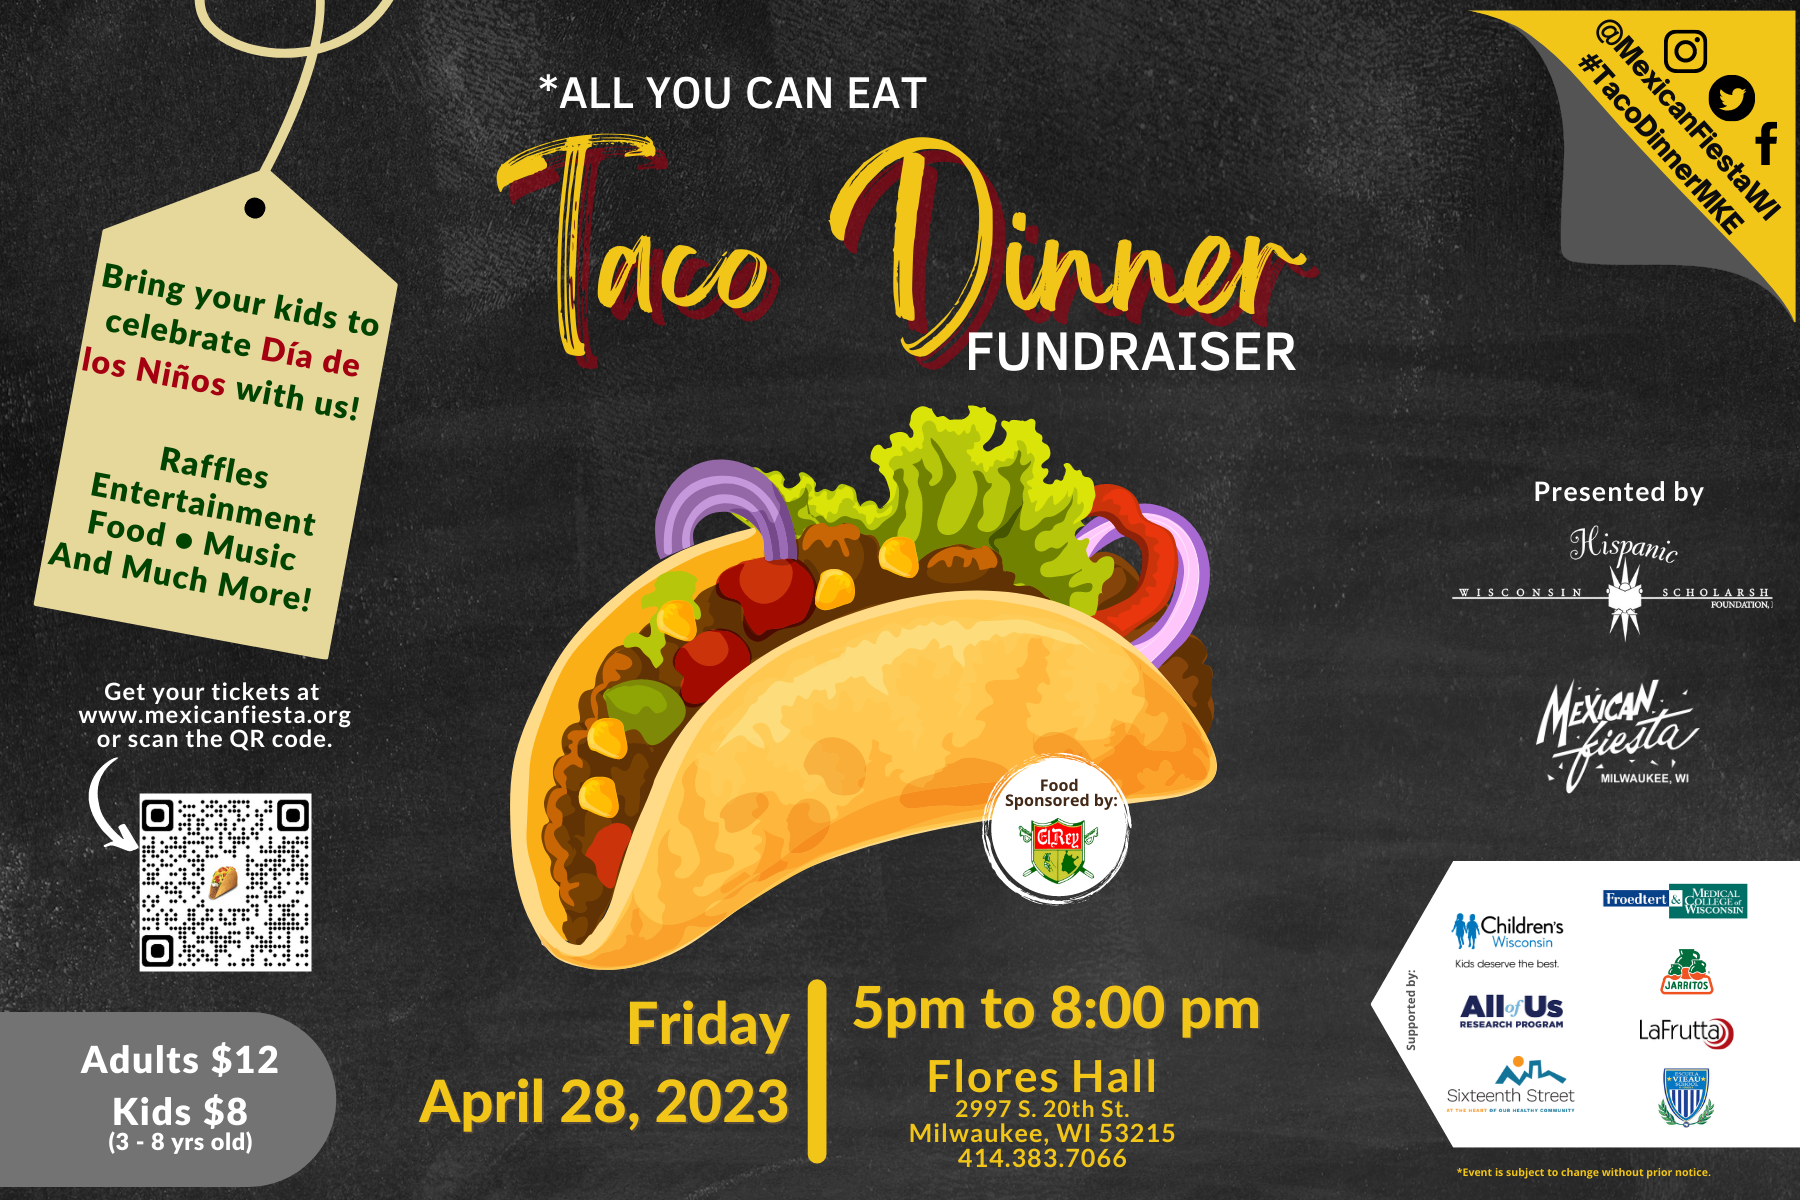 Taco Dinner All You Can Eat Fundraiser Event to Celebrate Kids Day